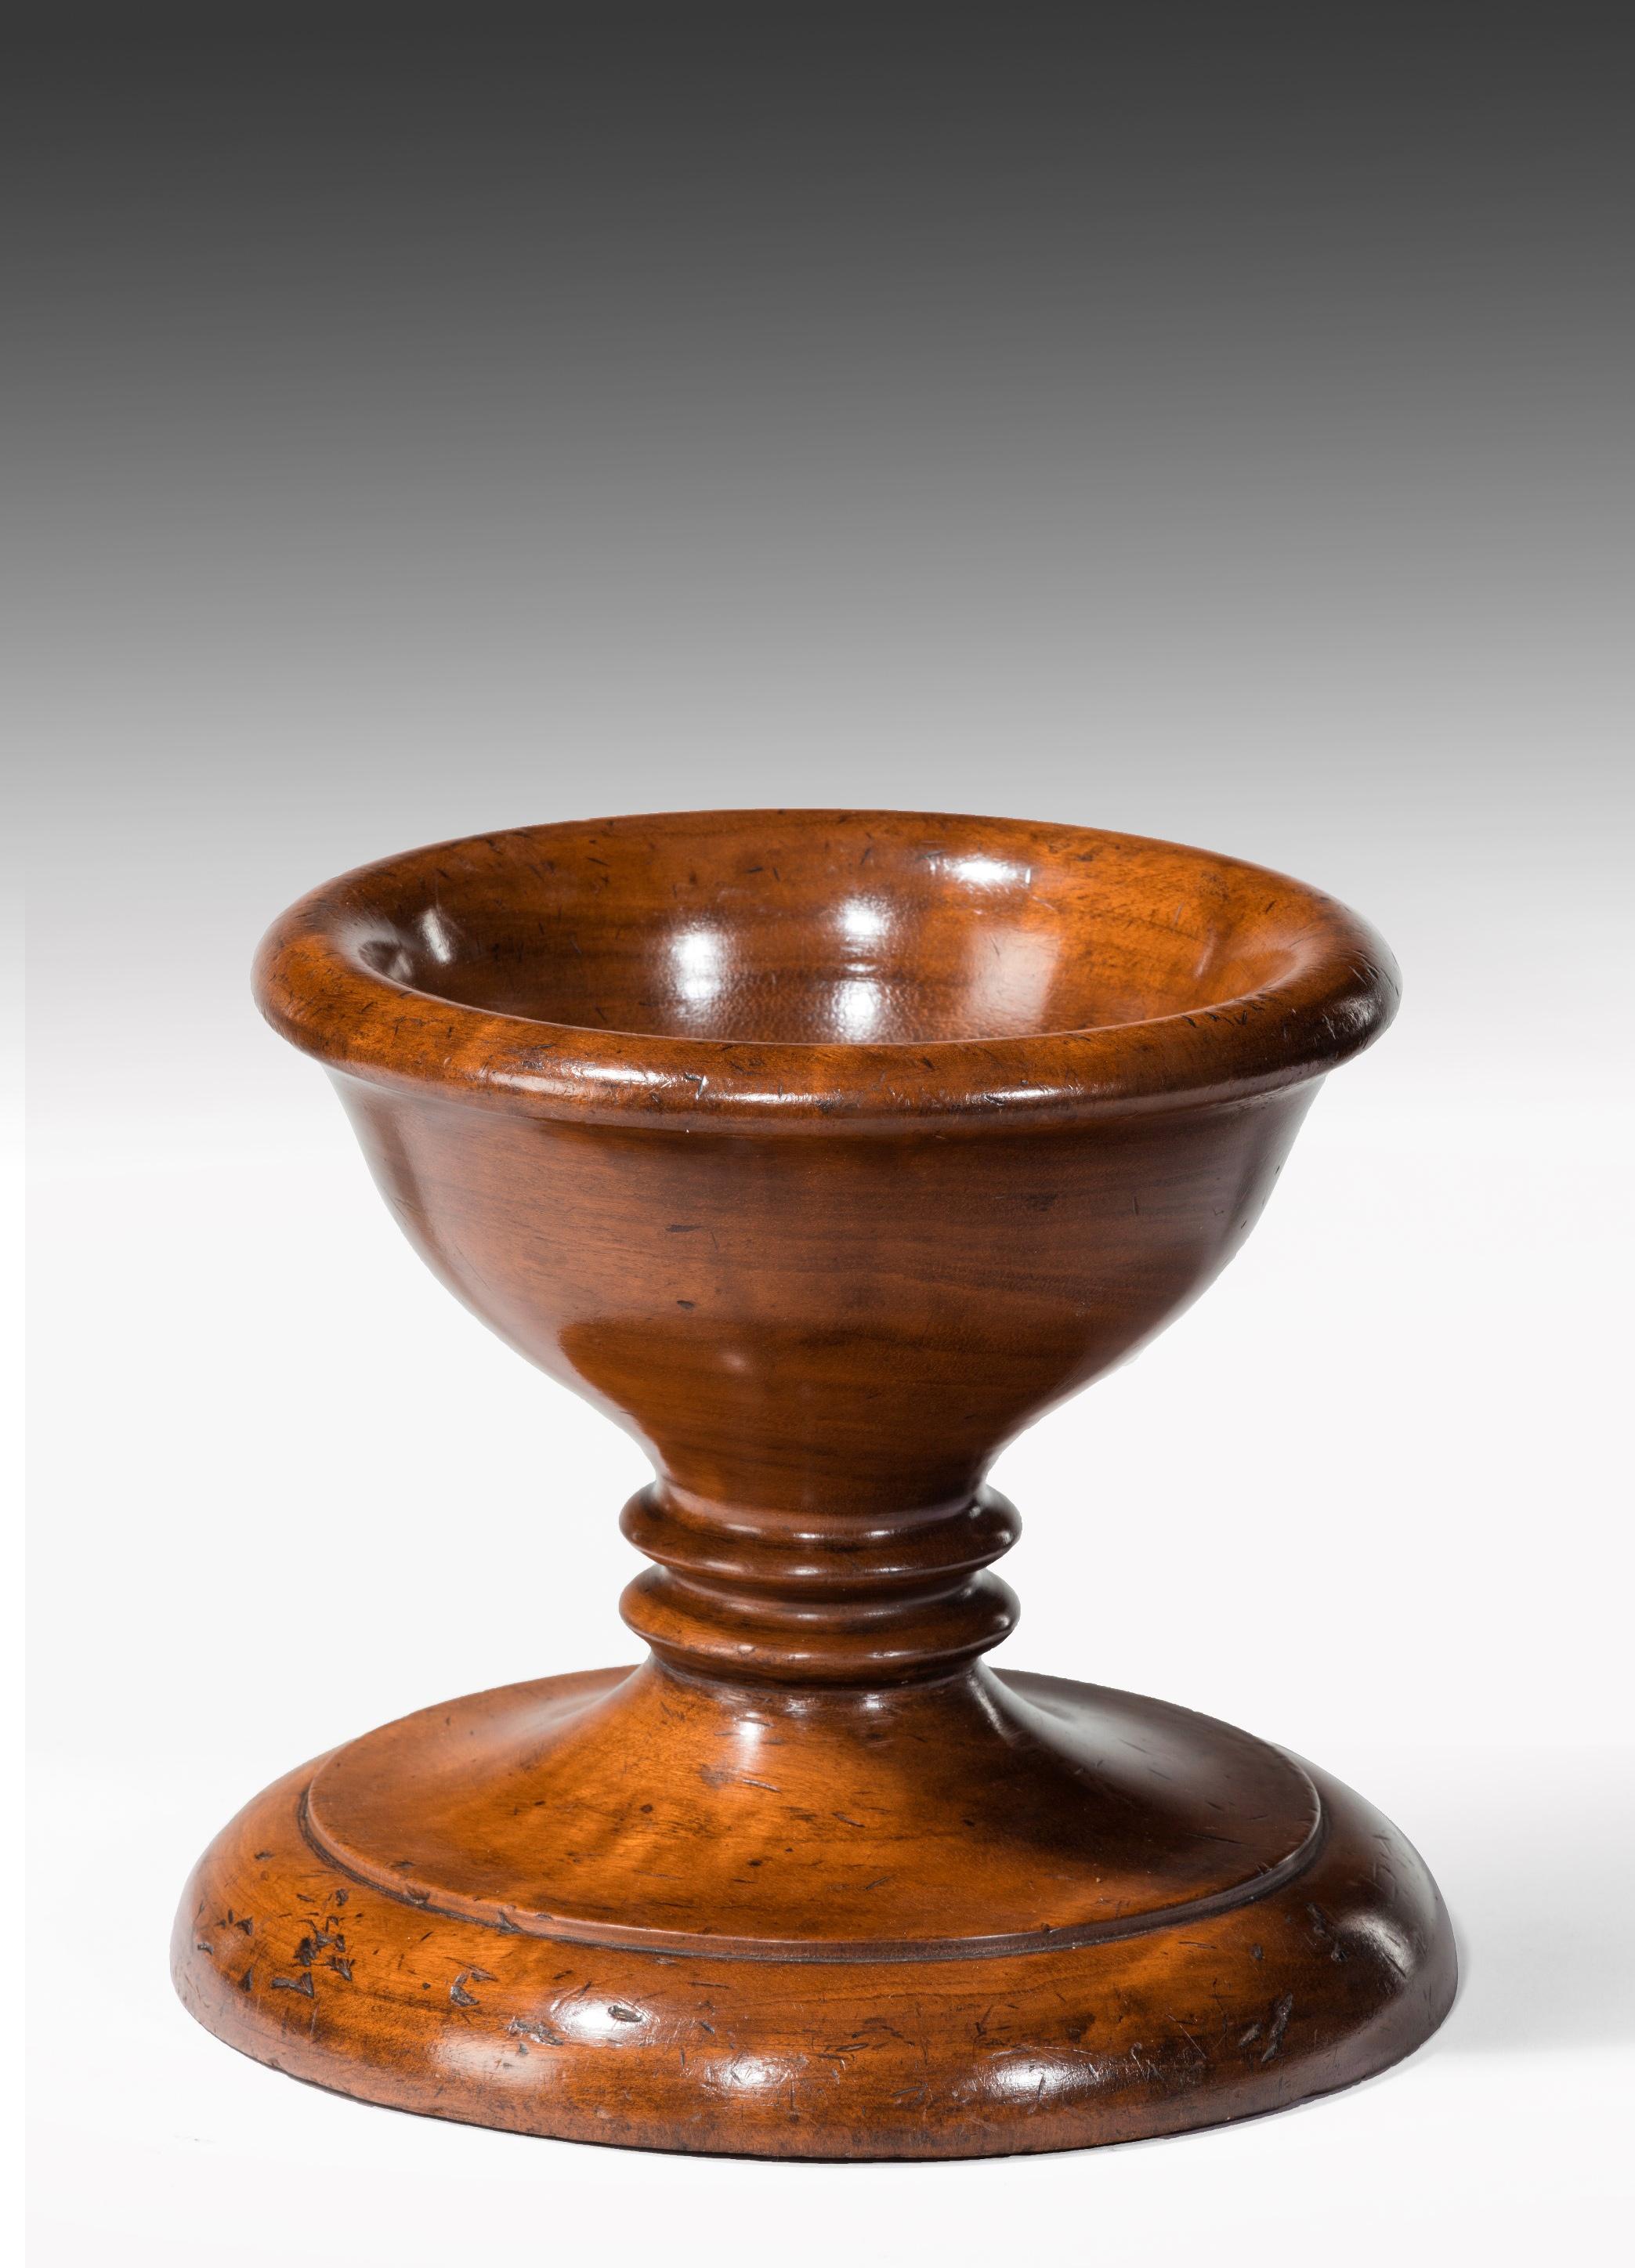 A large mid-19th century walnut treen master table salt.

English circa 1850.

Of excellent patina and color the bowl having an everted rim on a short turned stem and large moulded circular raised base. 

In excellent condition this imposing